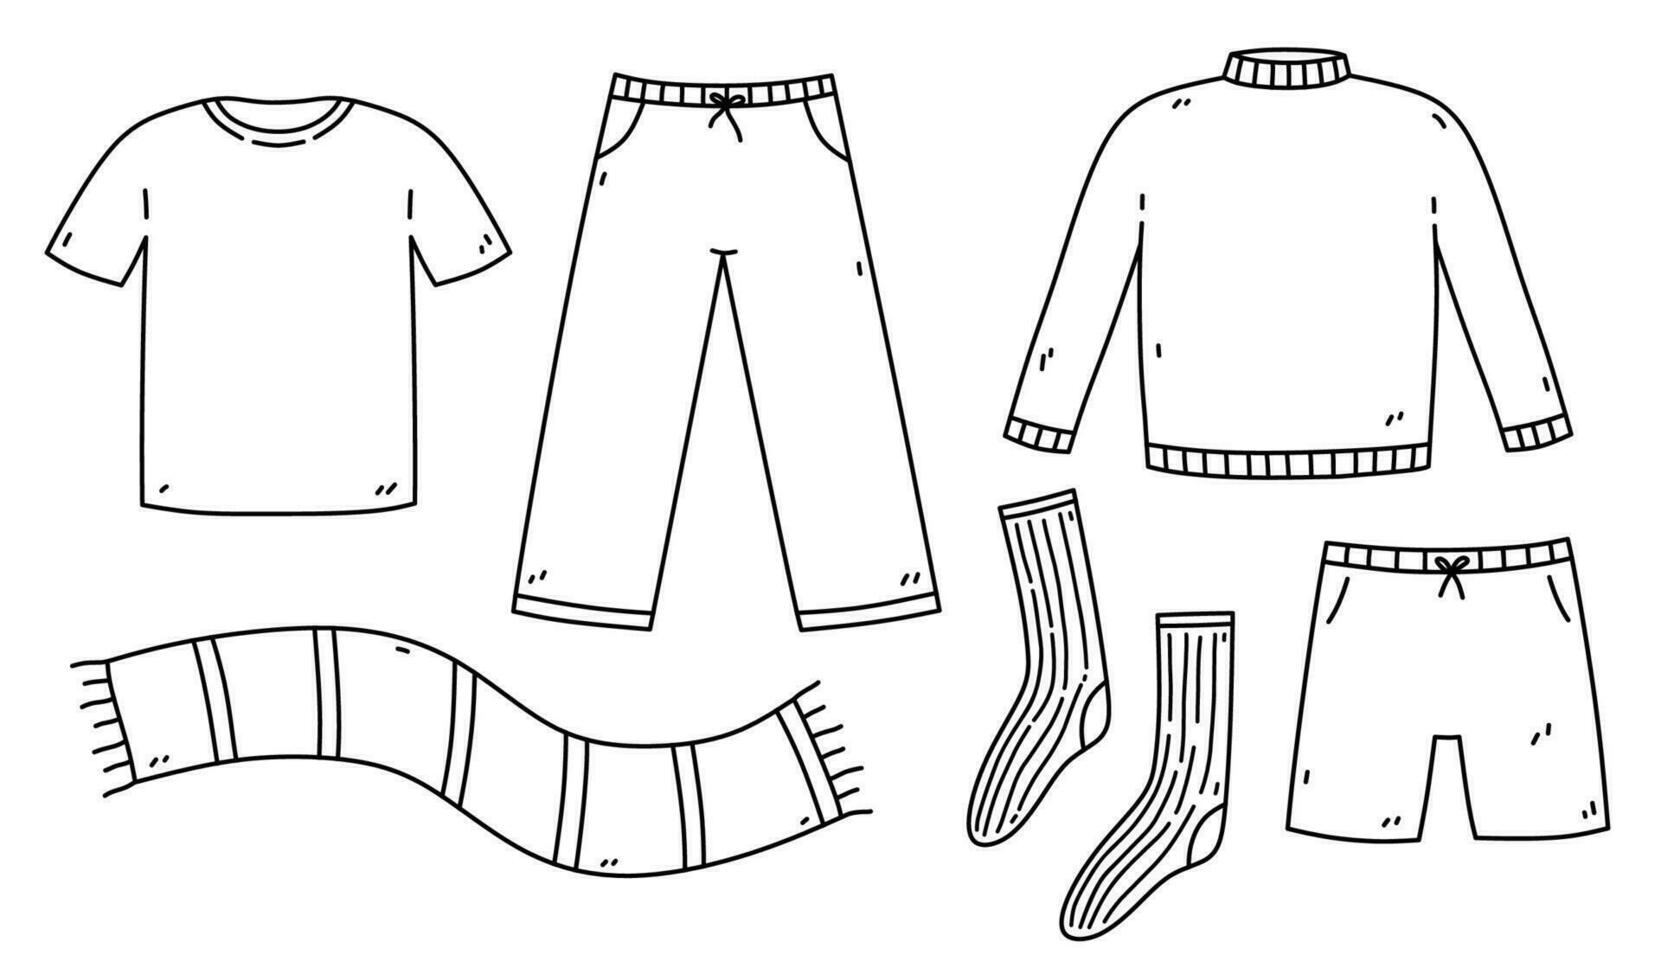 Set of men's clothing - T-shirt, pants, shorts, sweater, scarf, socks. Vector hand-drawn illustration in doodle style. Perfect for cards, decorations, logo, various designs.